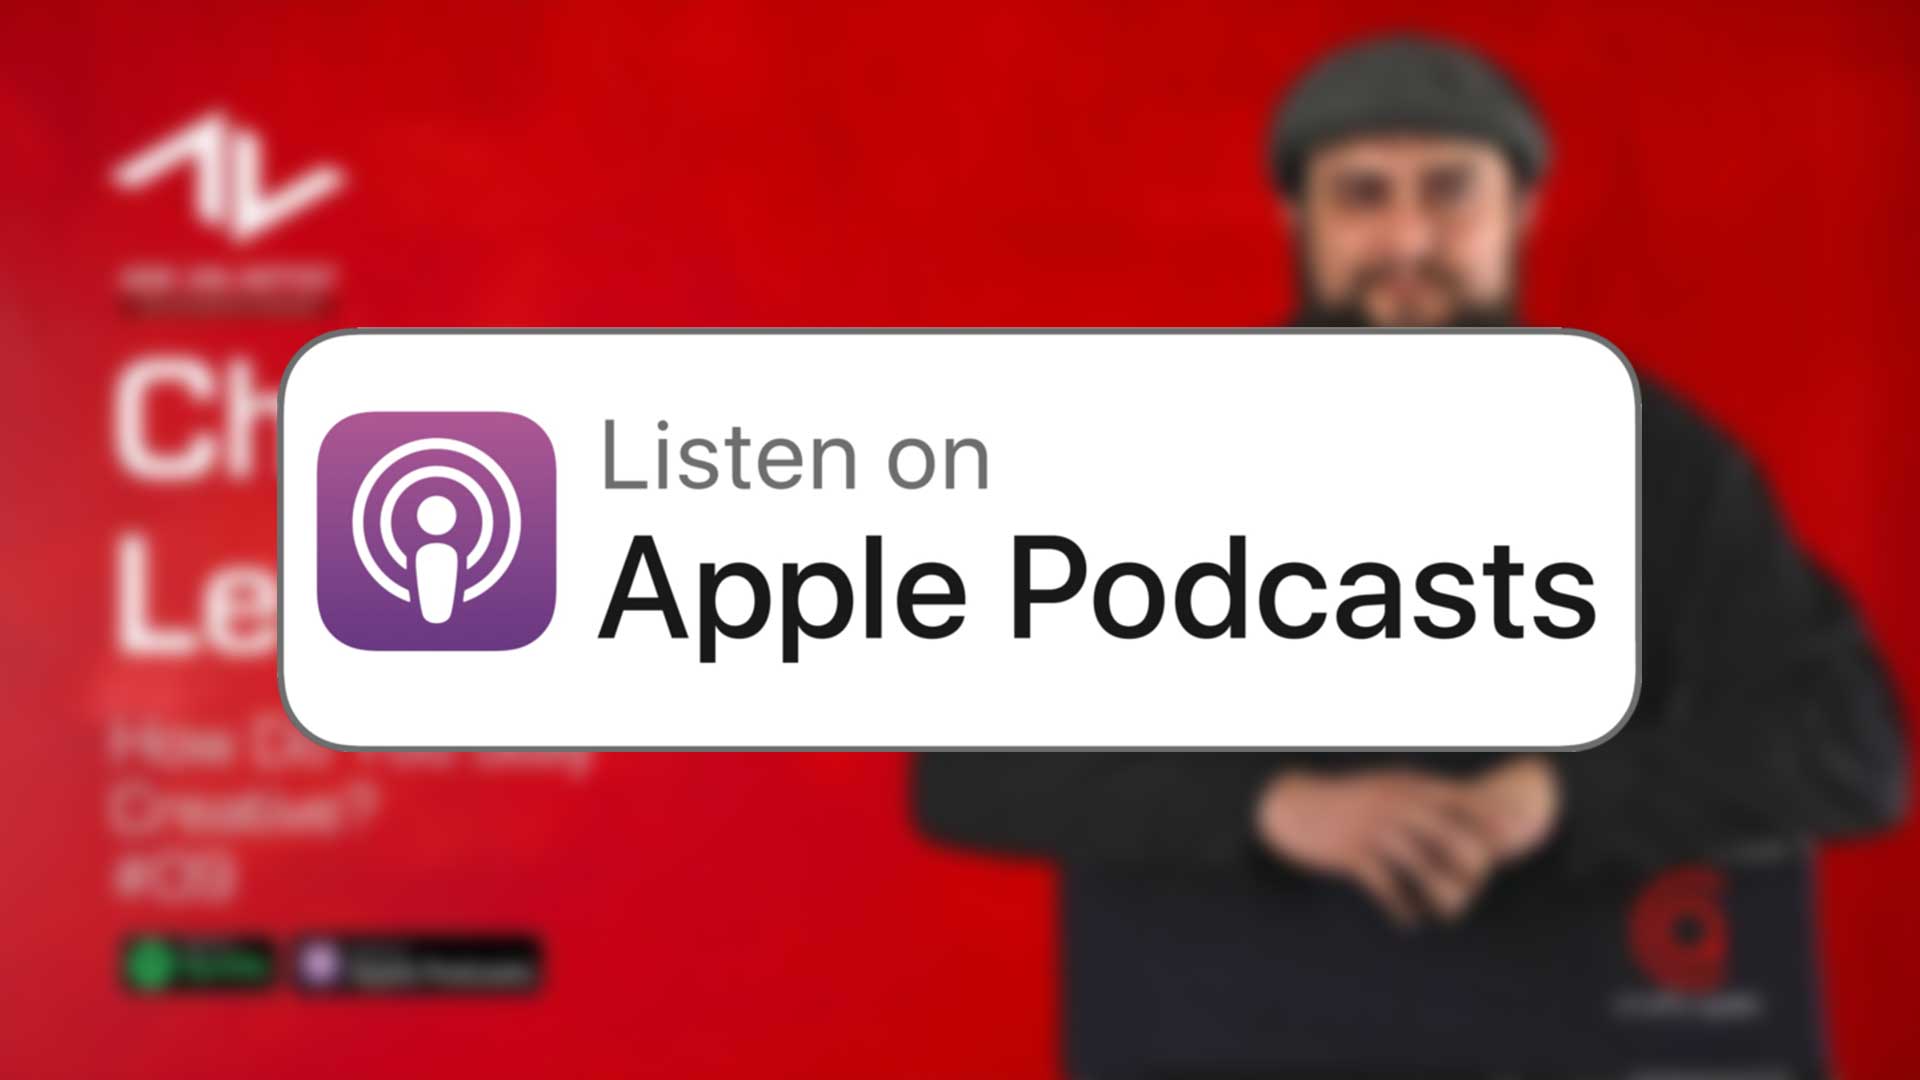 Listen to episode 9 of Ask An Artist on Apple Podcasts.